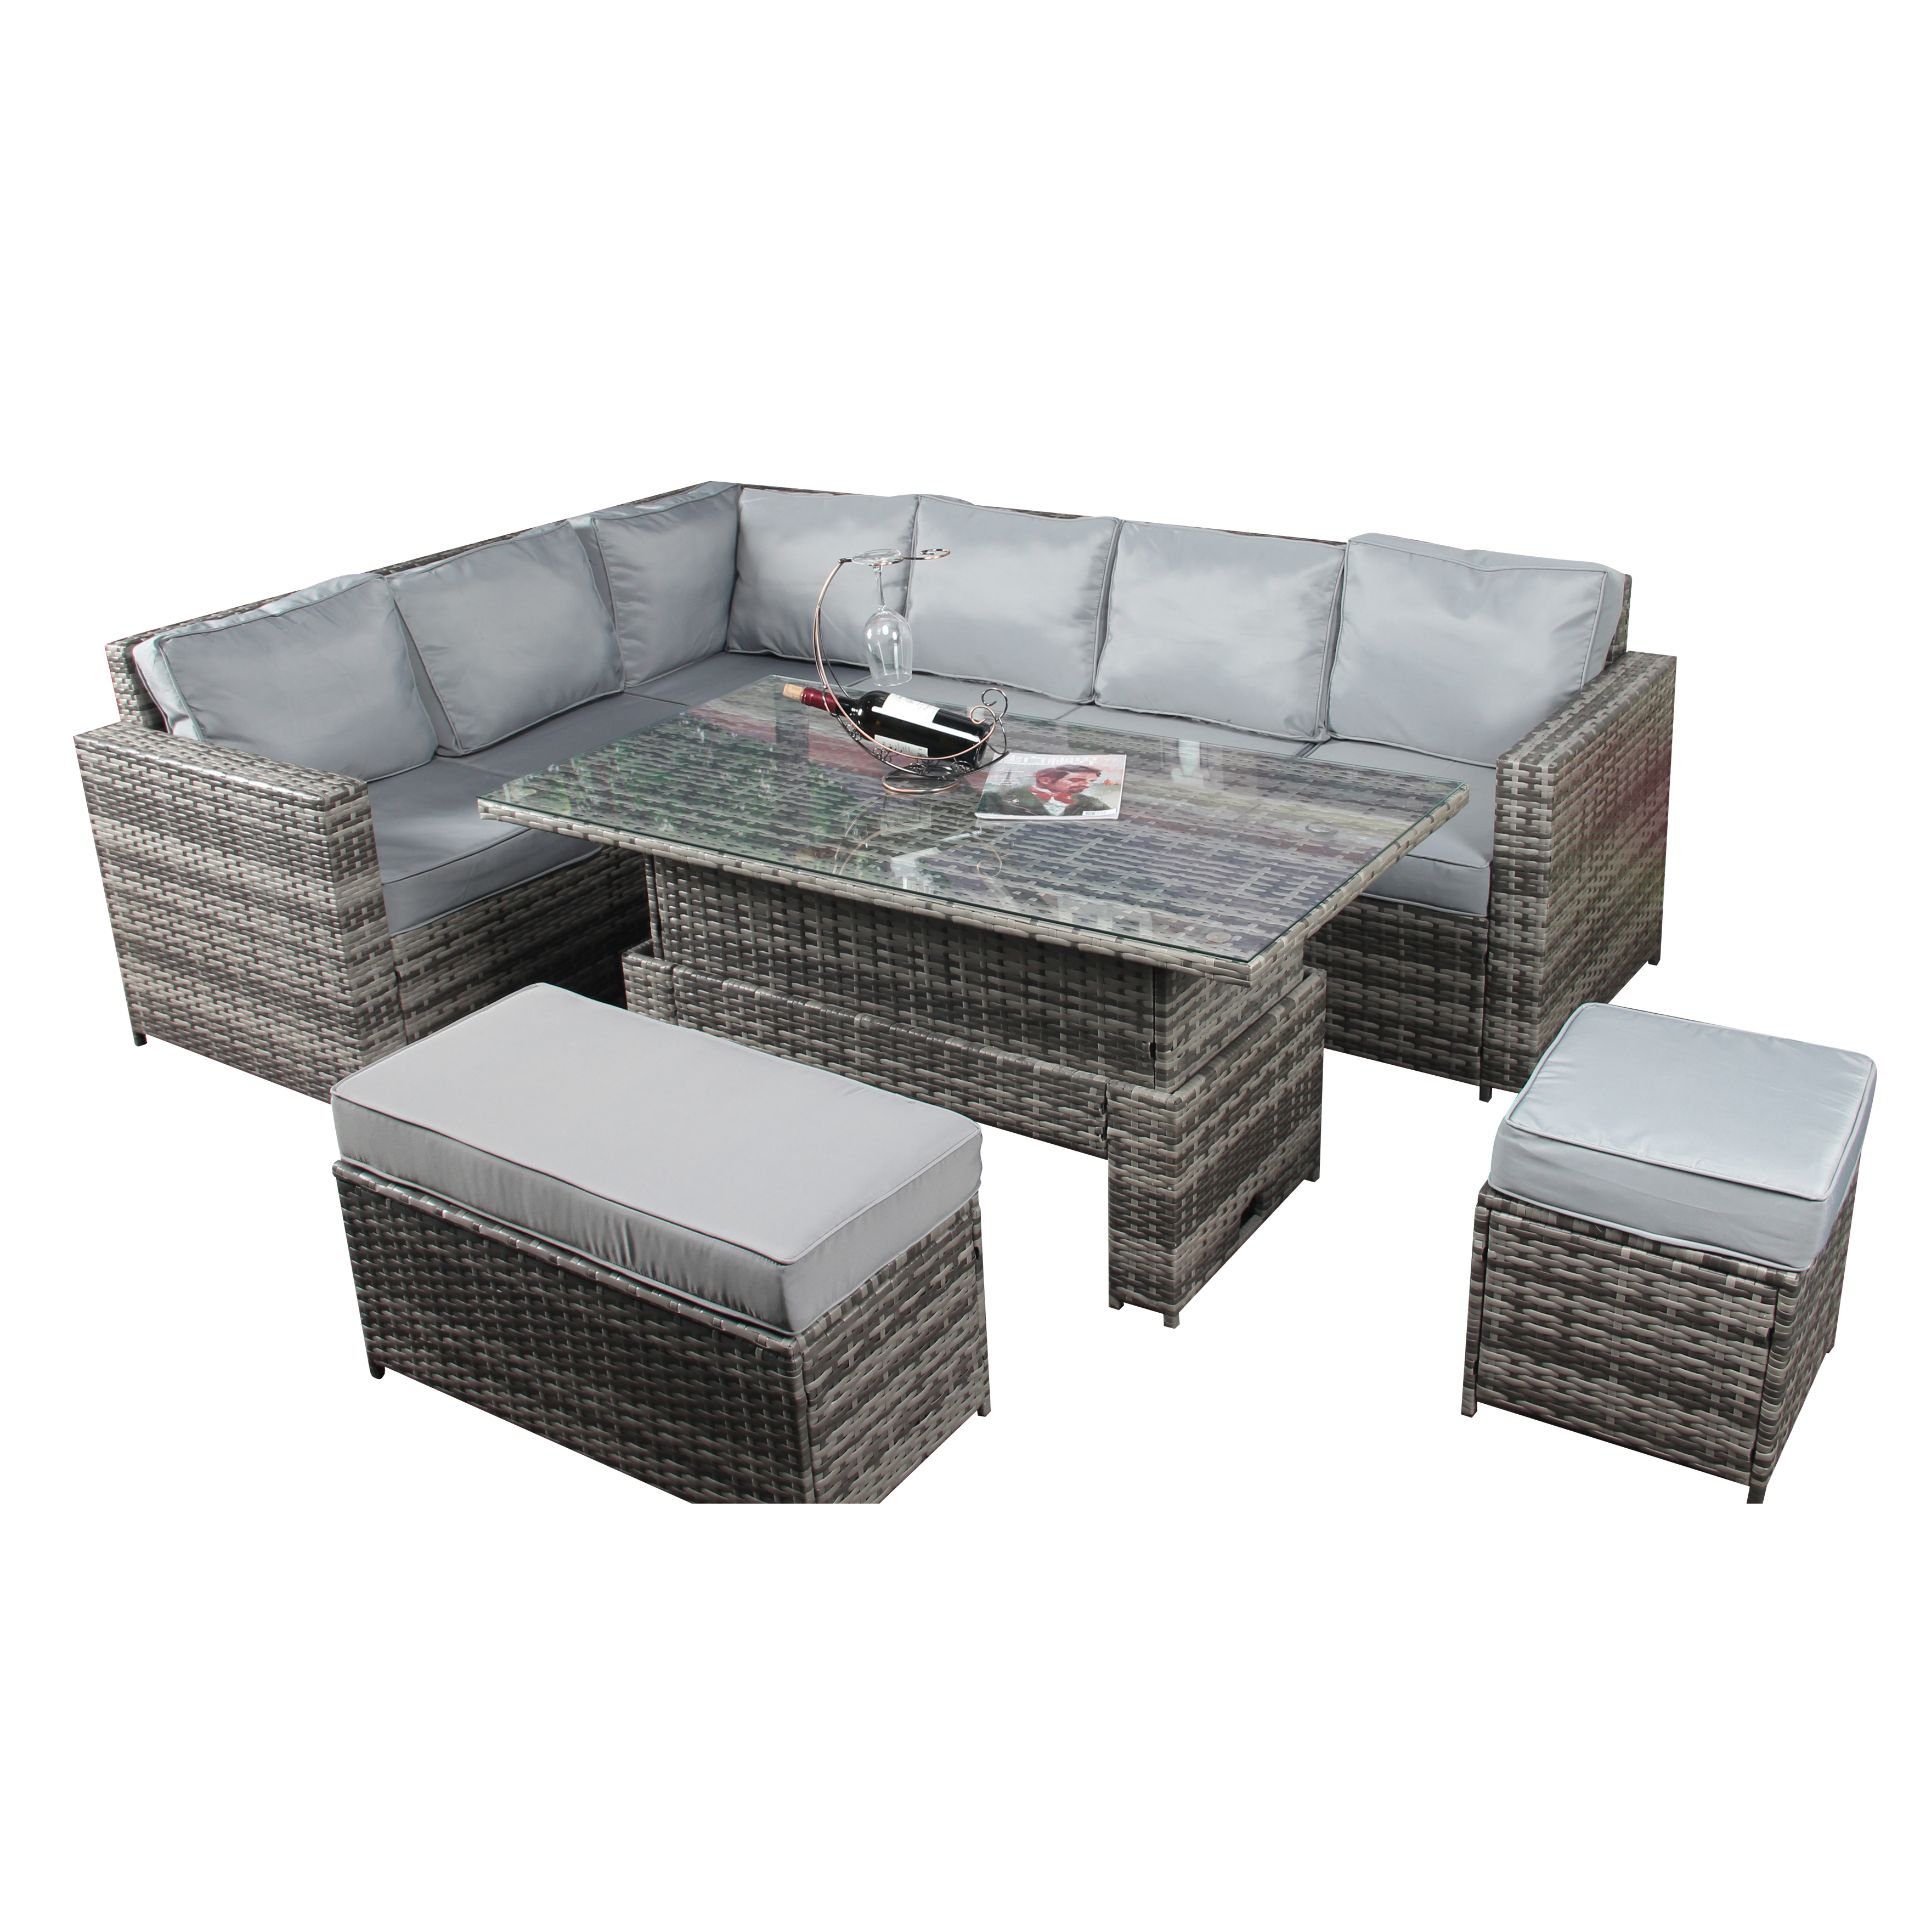 Luxury 8 Seater Rattan Corner Set in Grey with Grey Cushions *PLUS VAT* - Image 3 of 4